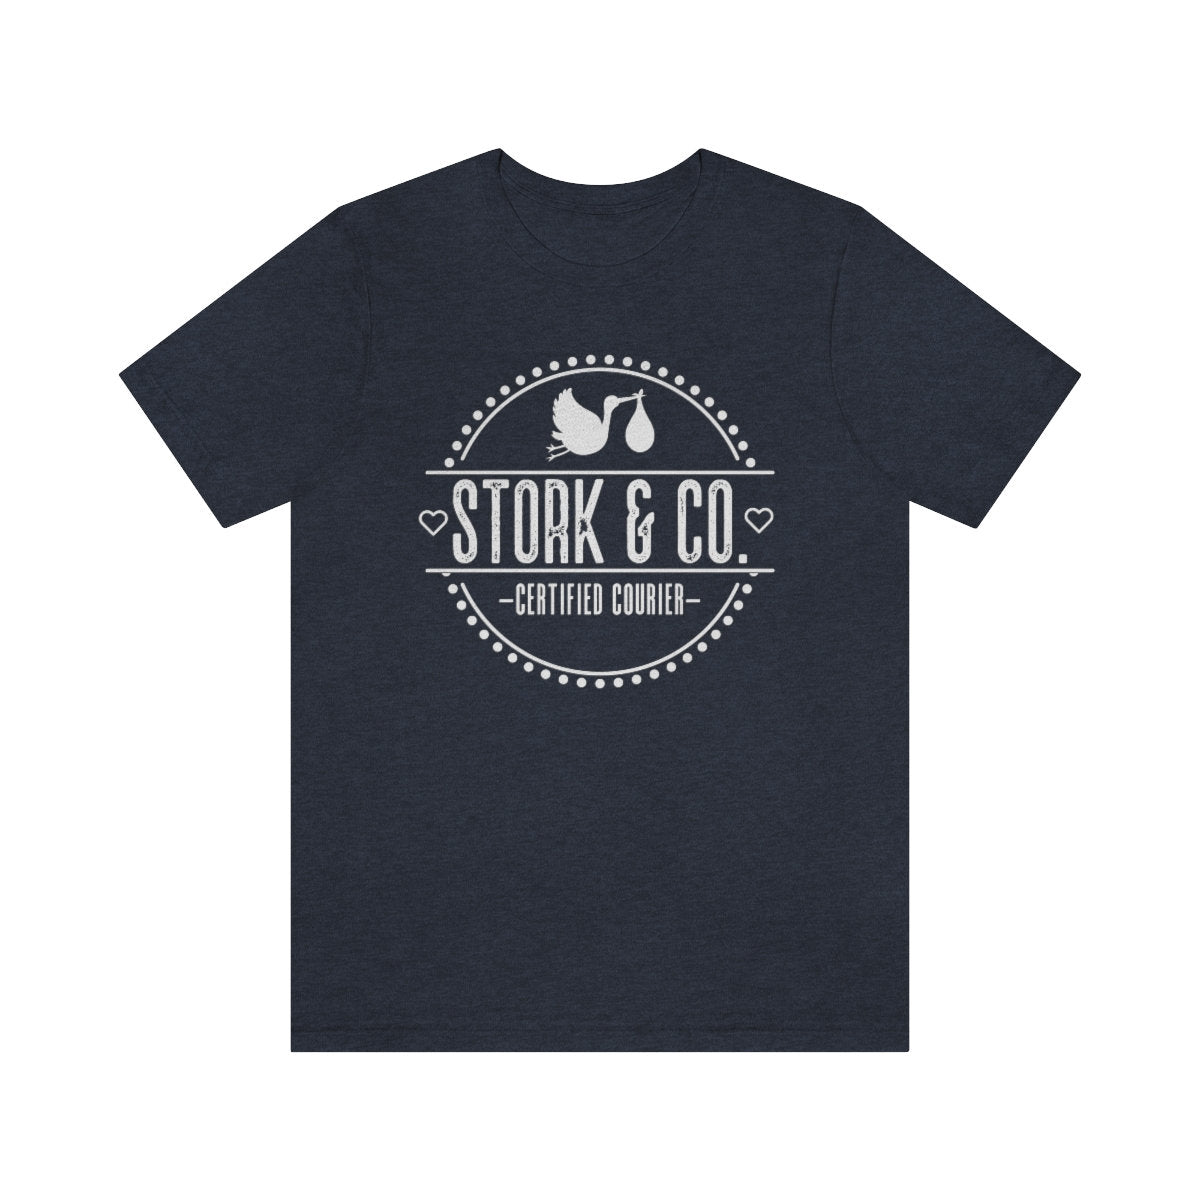 Stork and Co Certified Courier Tshirt